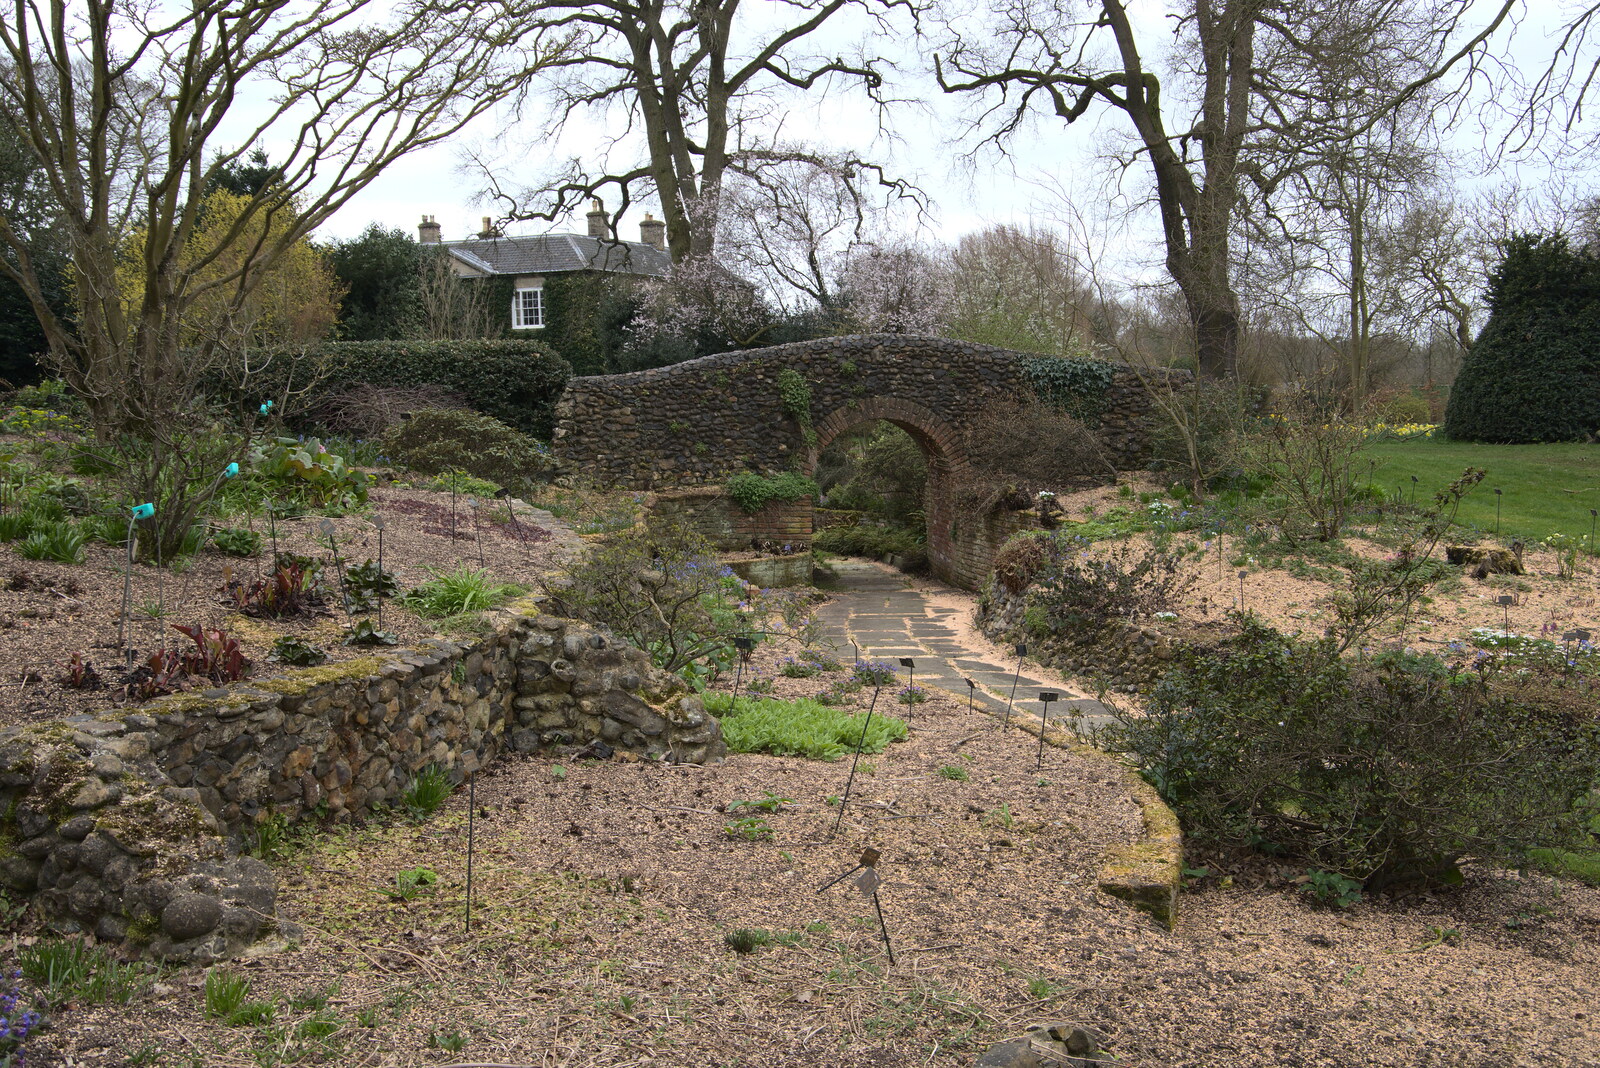 The little bridge from A Return to Bressingham Steam and Gardens, Bressingham, Norfolk - 28th March 2021